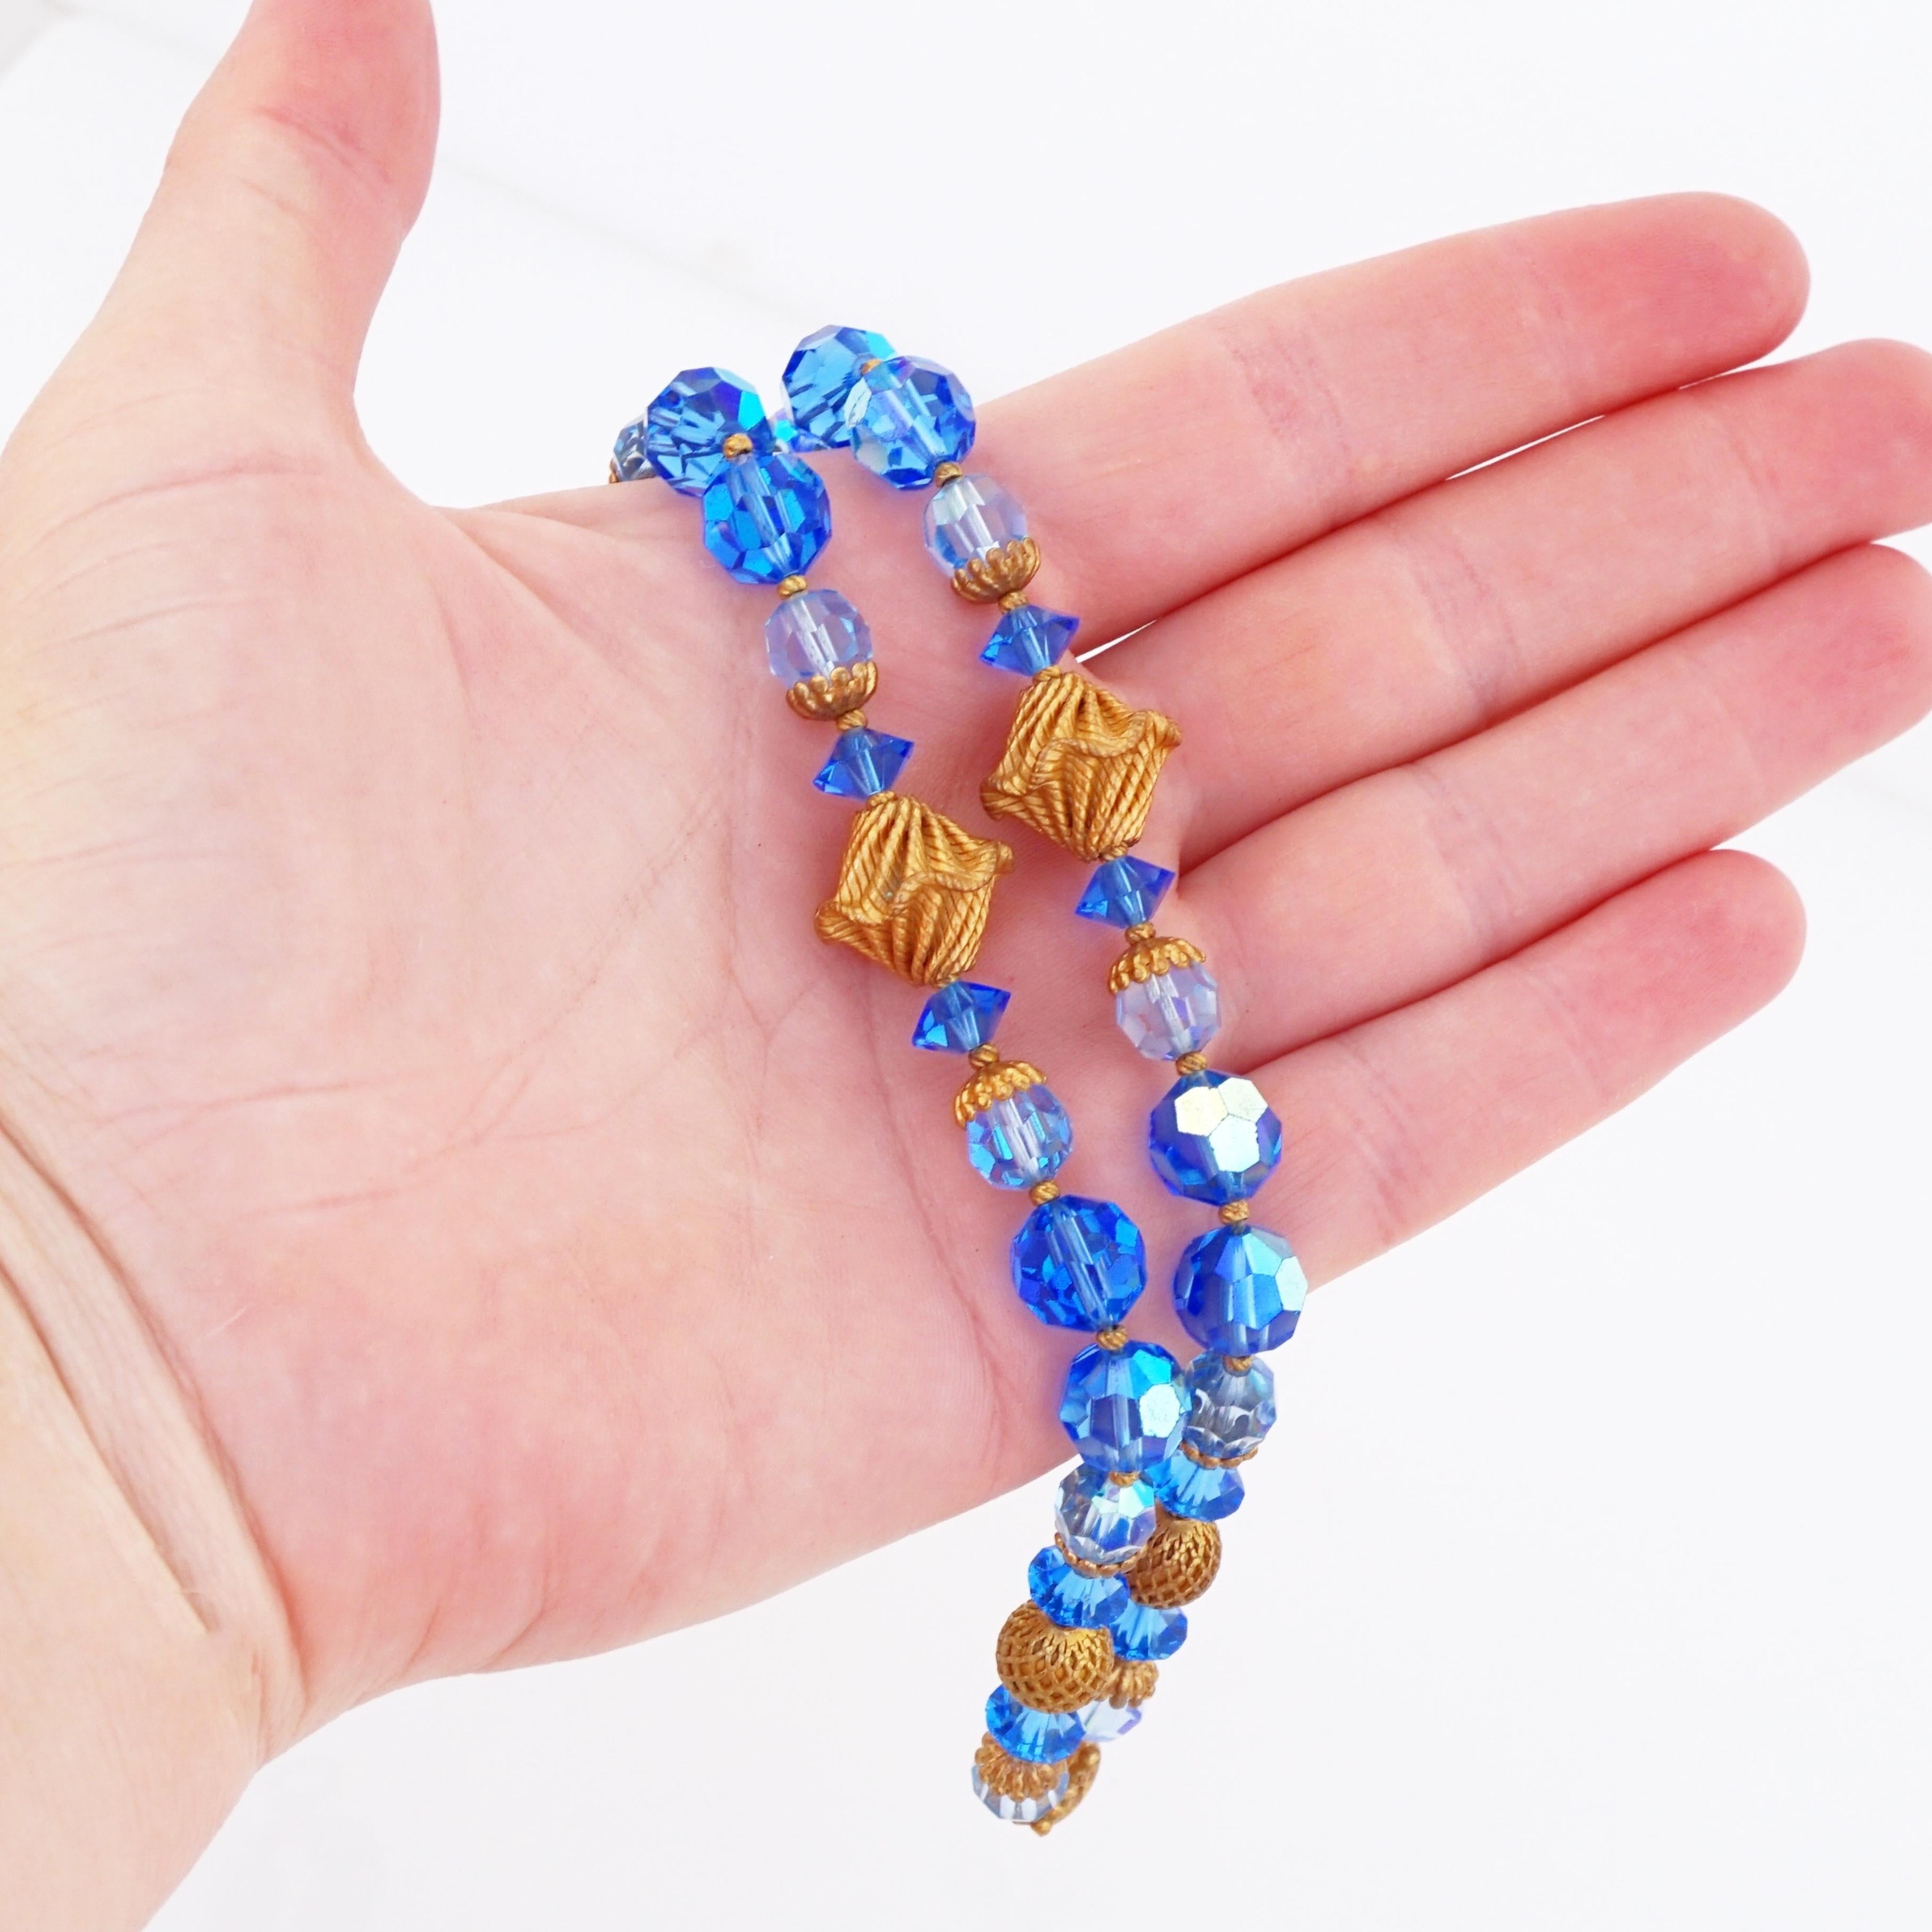 Two Strand AB Blue Bead Bracelet With Gold Accents By Eugene Schultz, 1950s In Good Condition For Sale In McKinney, TX